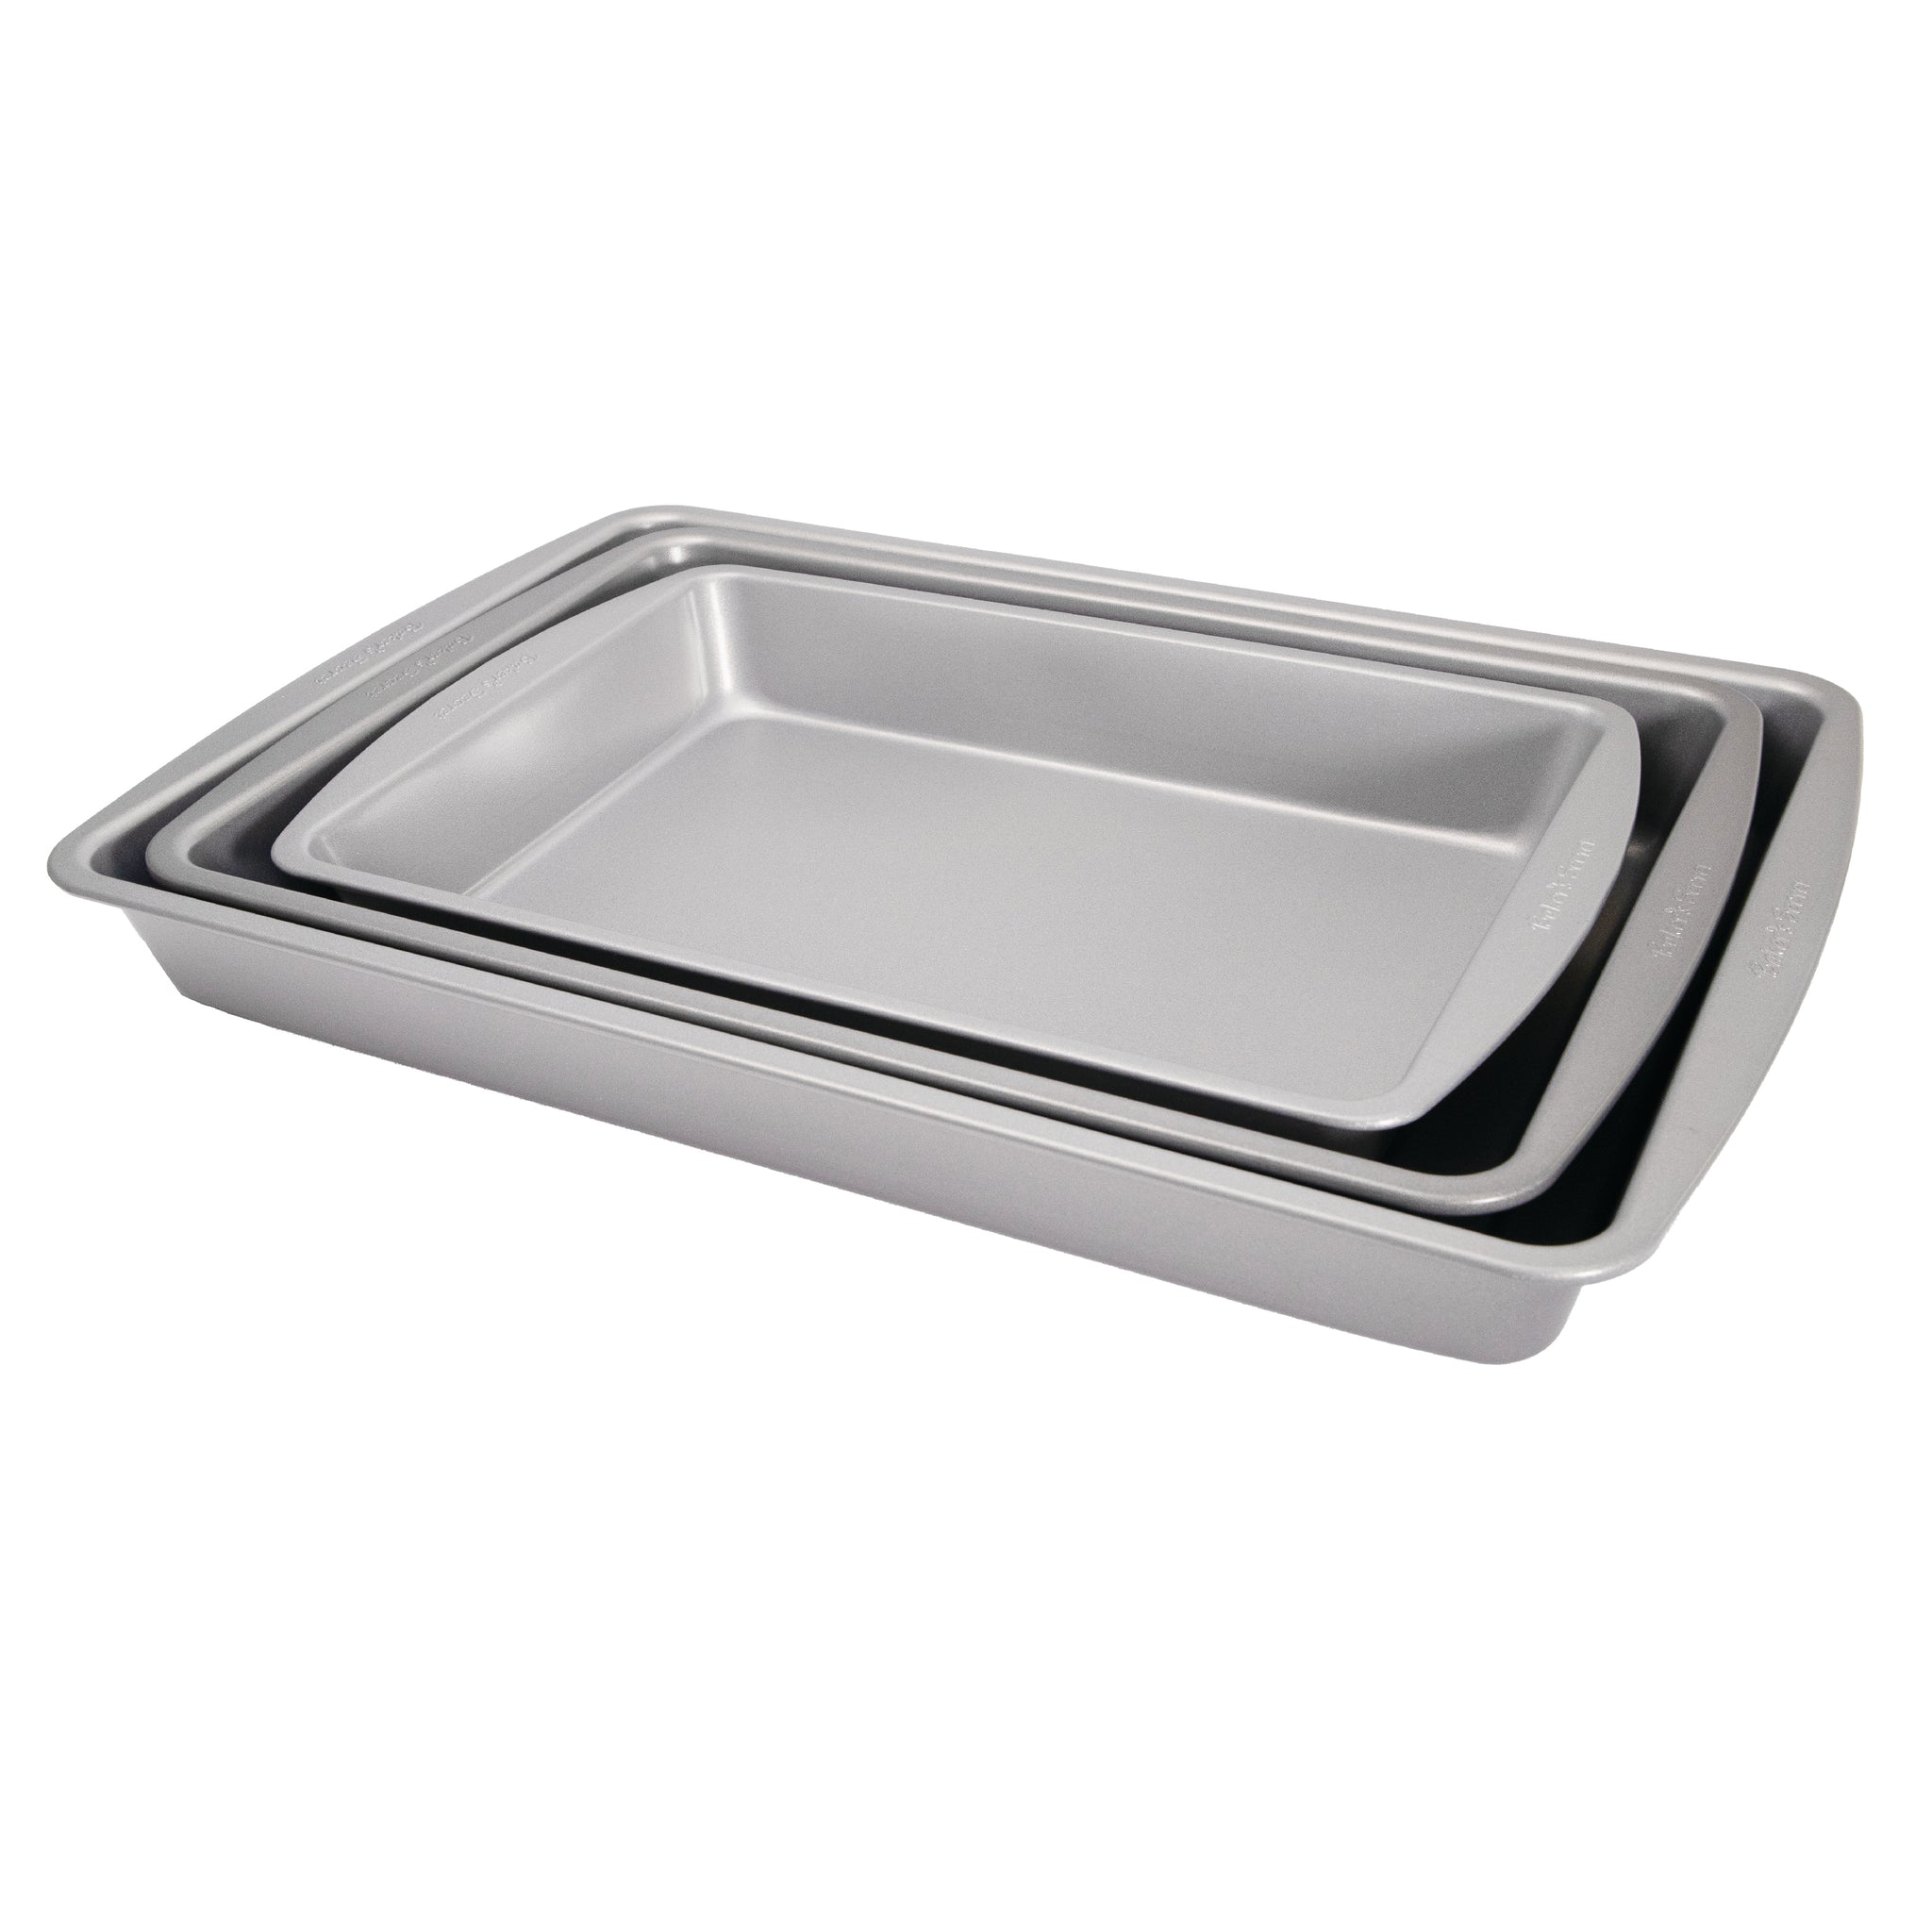 Extra large 43x30cm Non-Stick Shallow Roasting Pan/Oven Baking Tray  w/Hanndle